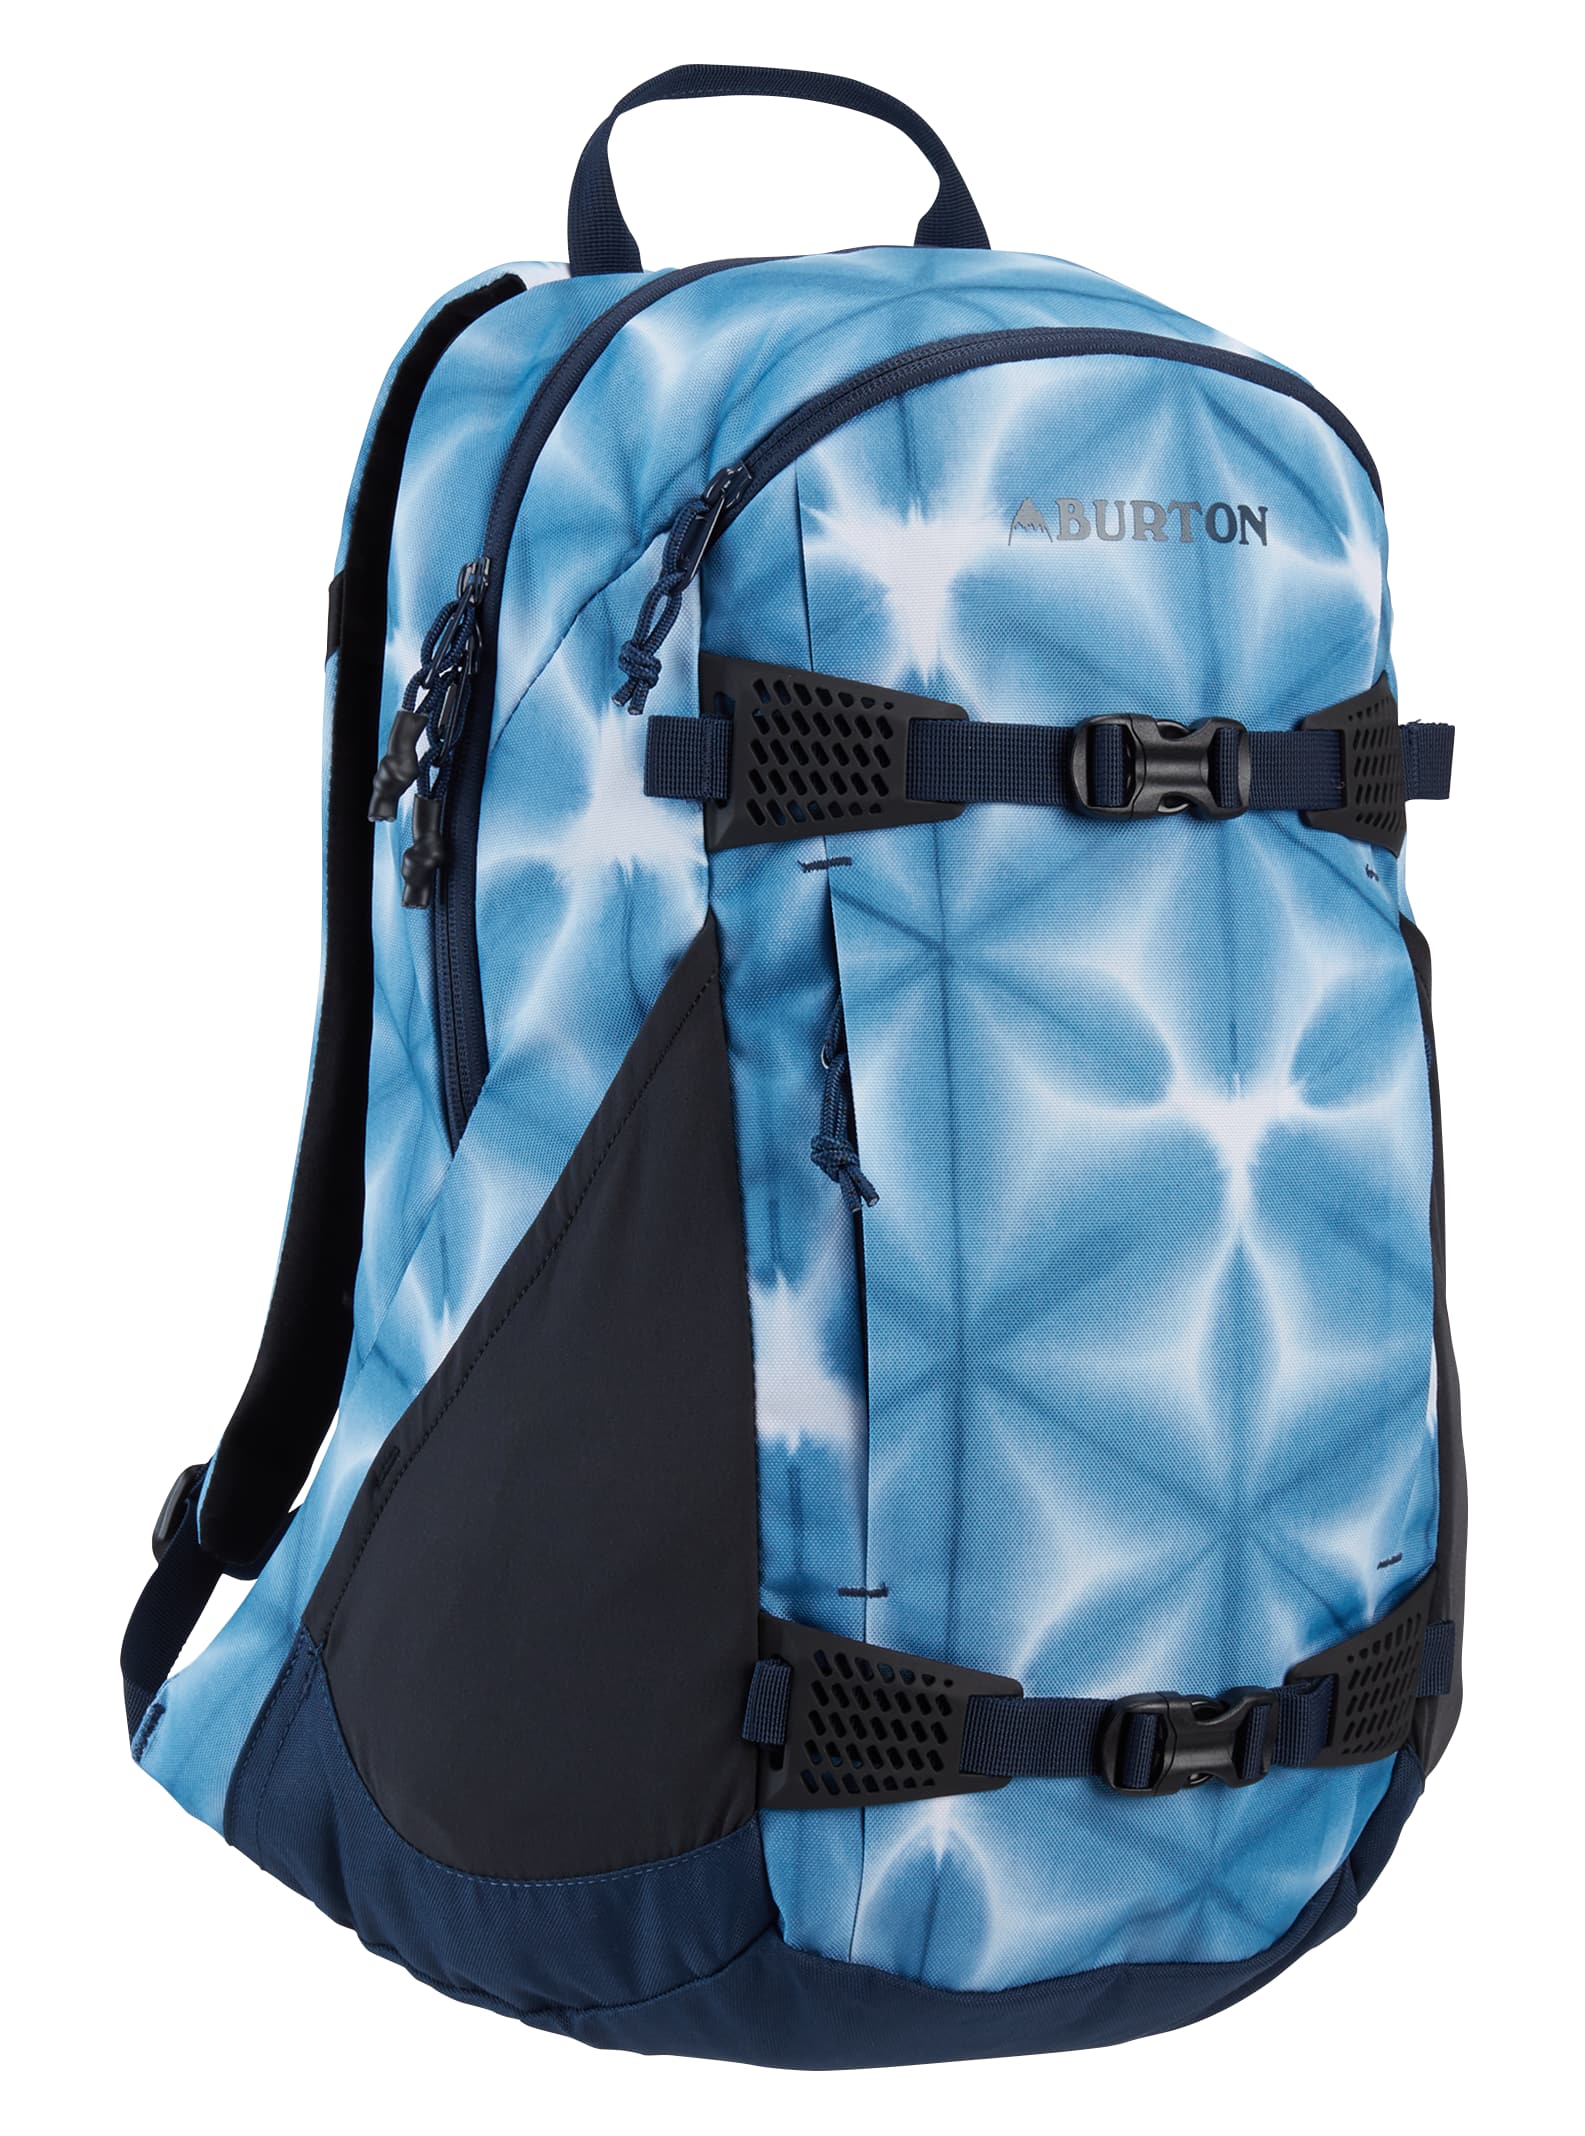 COLOR: IKAT STRP BURTON DAY HIKER WOMEN'S BACKPACK NEW!!! SIZE: 23L 